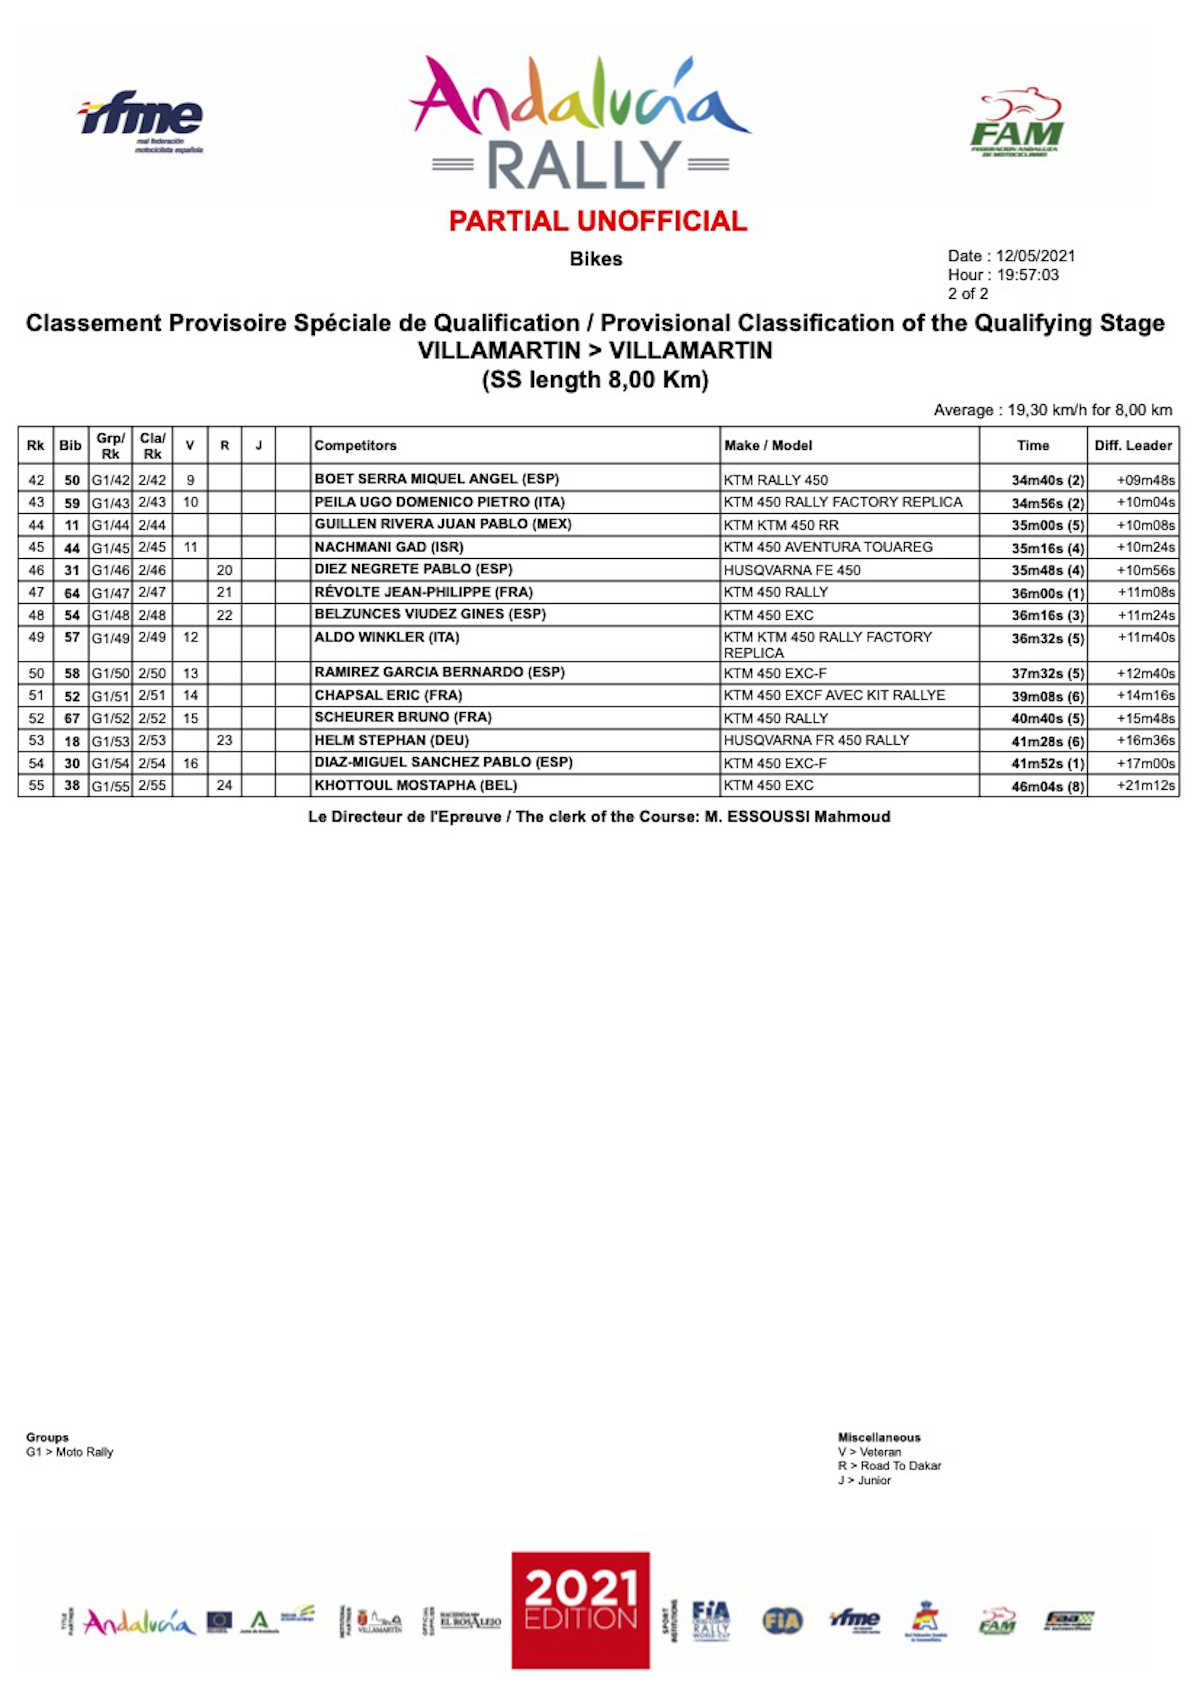 andalucia-rally-results-2